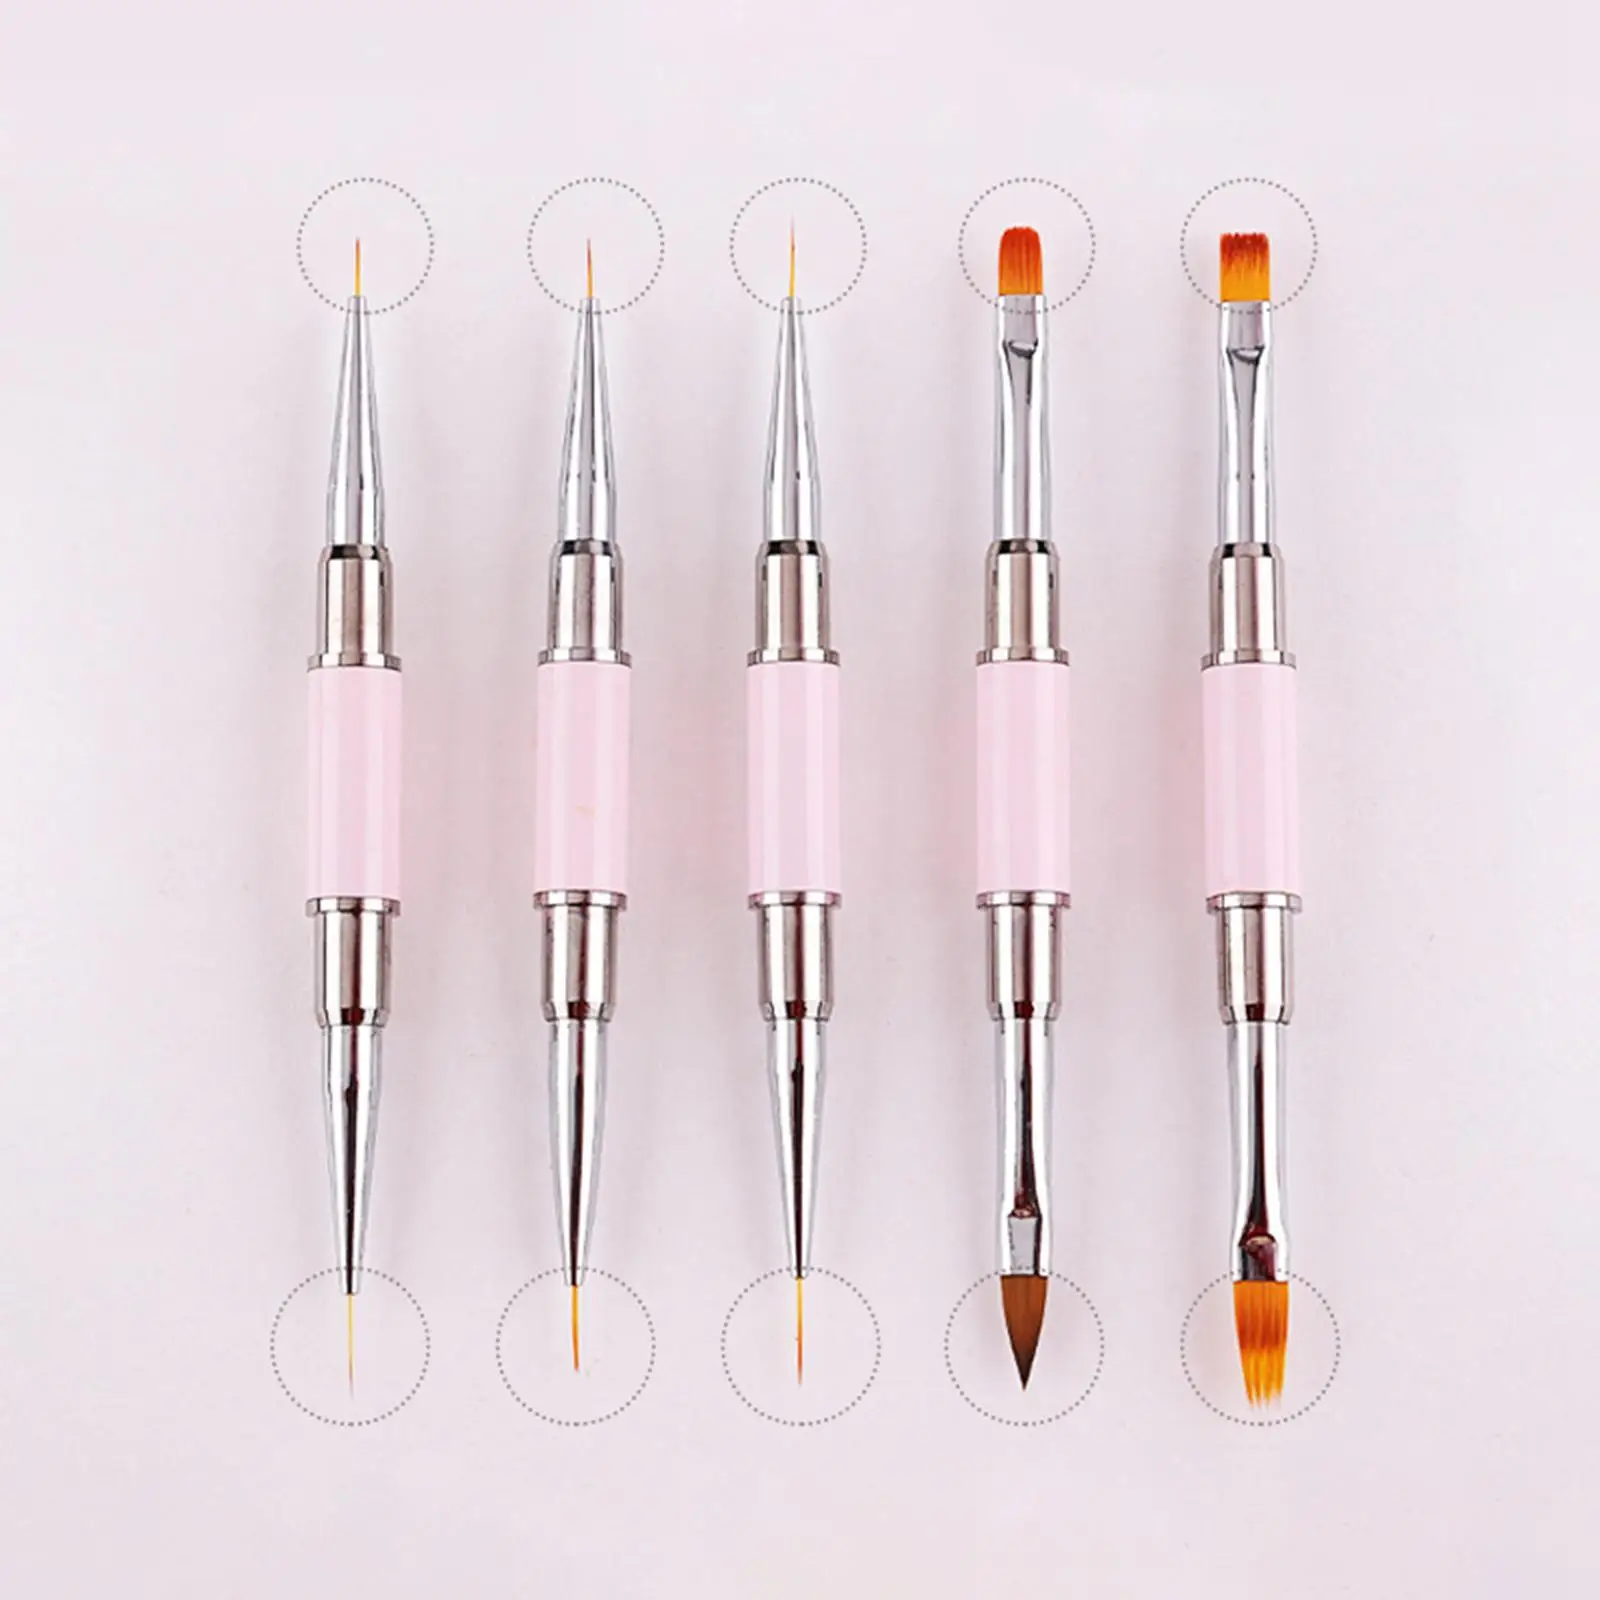 5 Pieces Dual Ended Nail Art Brushes Set Nail Design Painting Brushes Nail Art Design Pen for DIY Manicure Salon DIY at Home